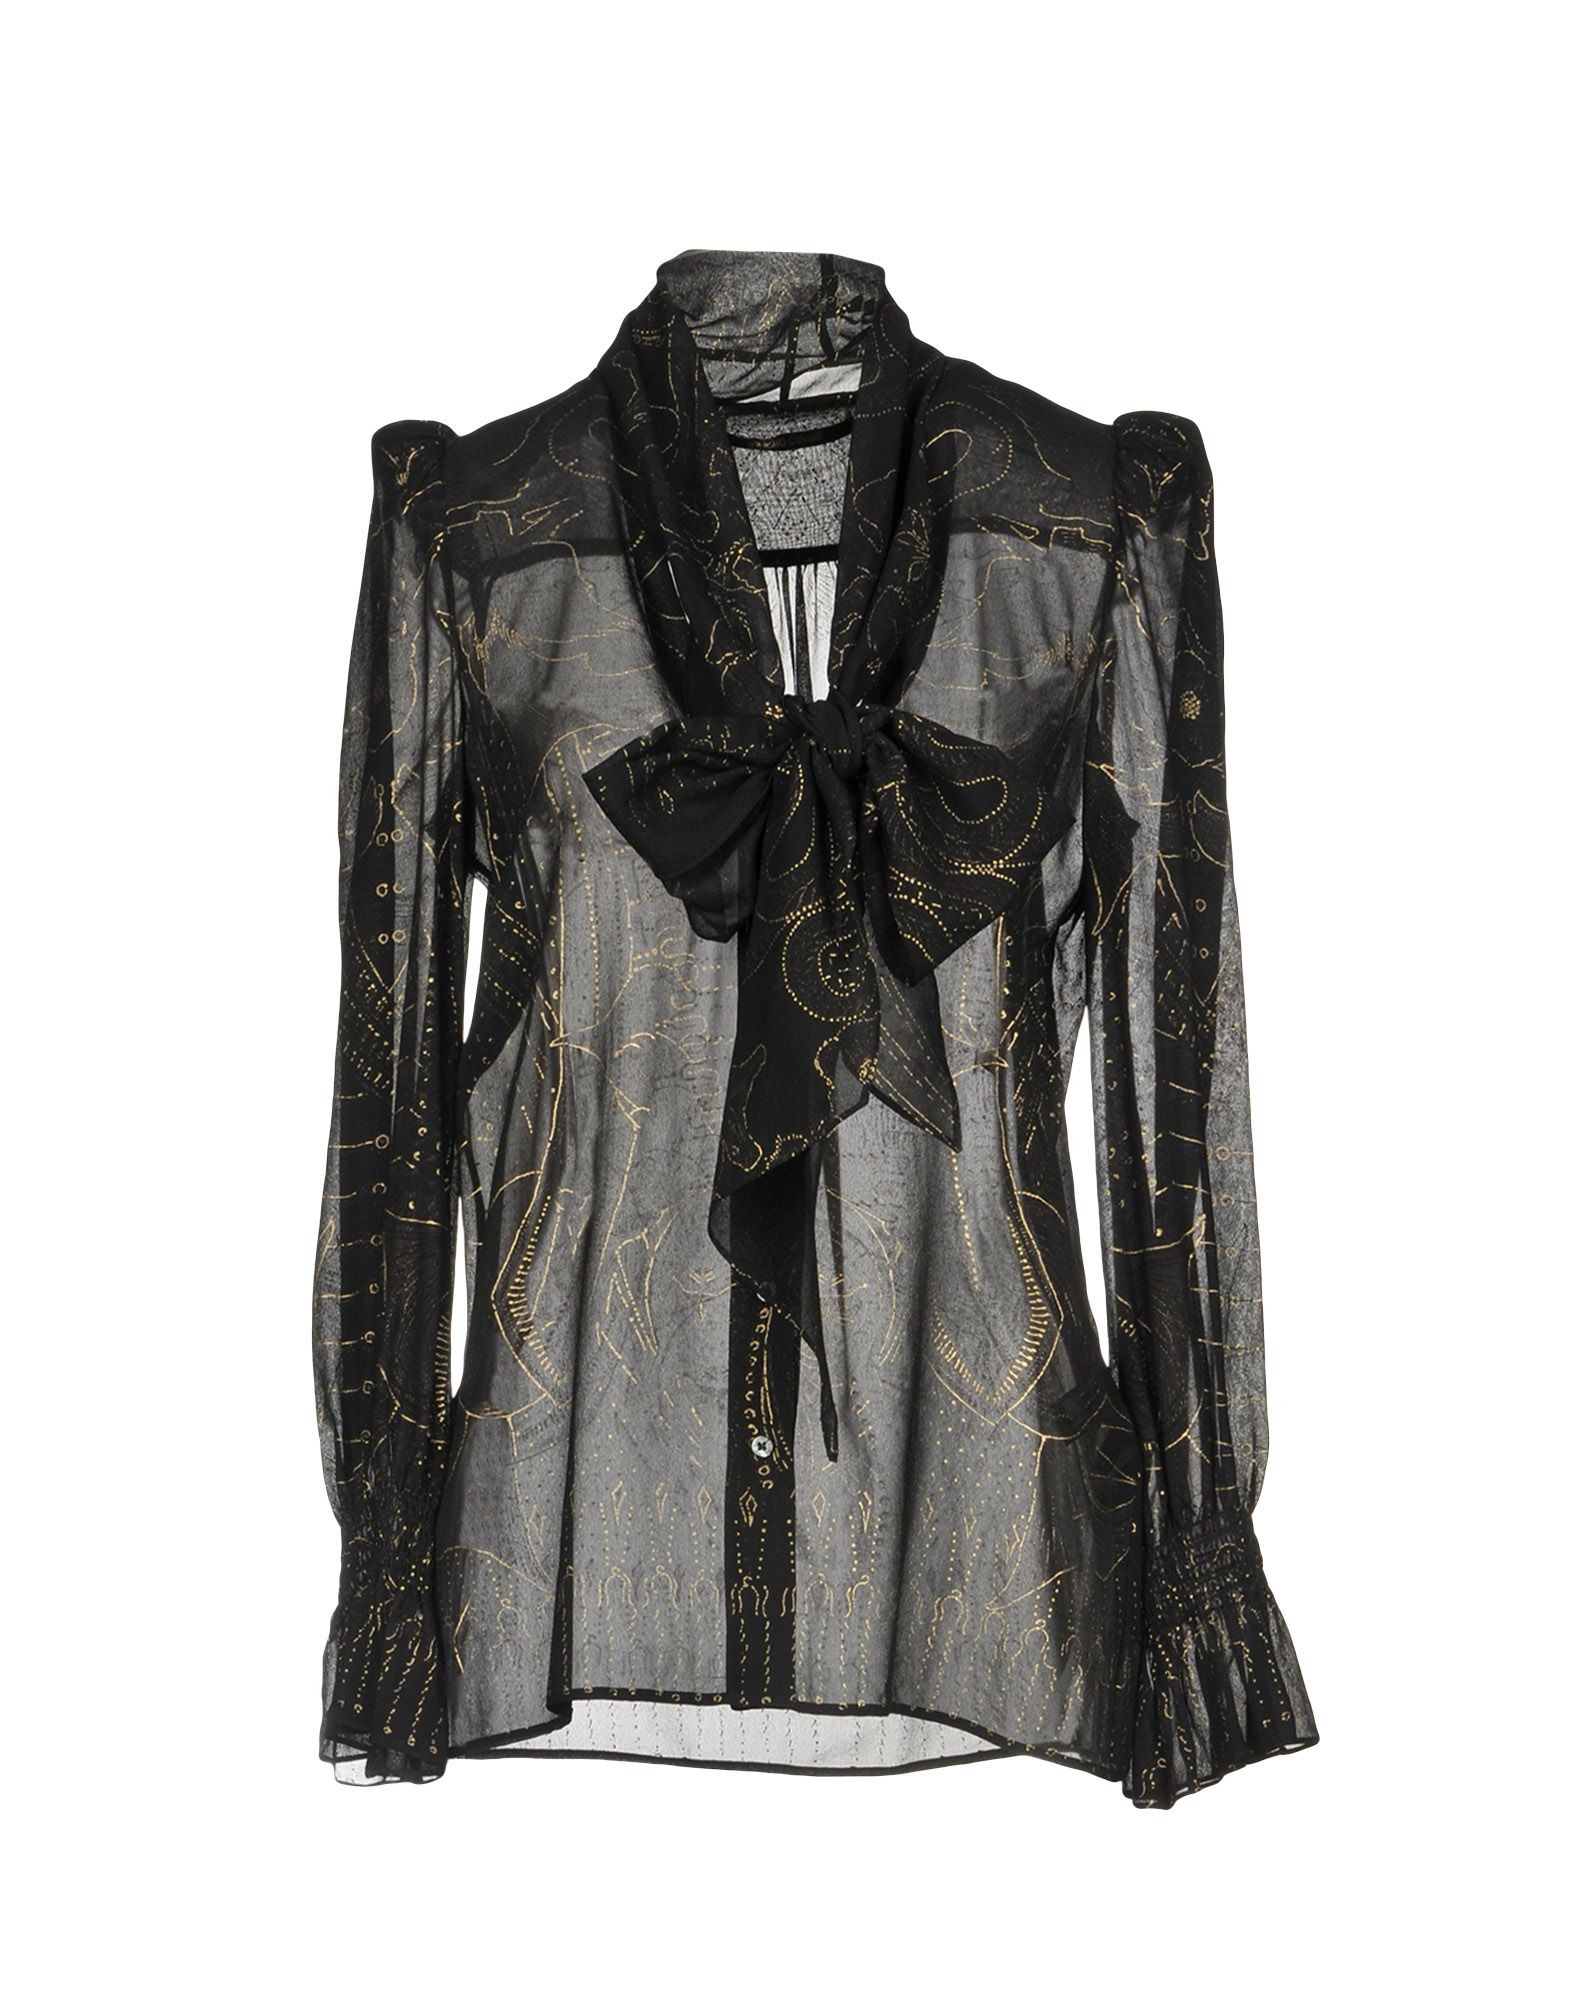 dressing gownRTO CAVALLI Patterned shirts & blouses,38763957BM 3